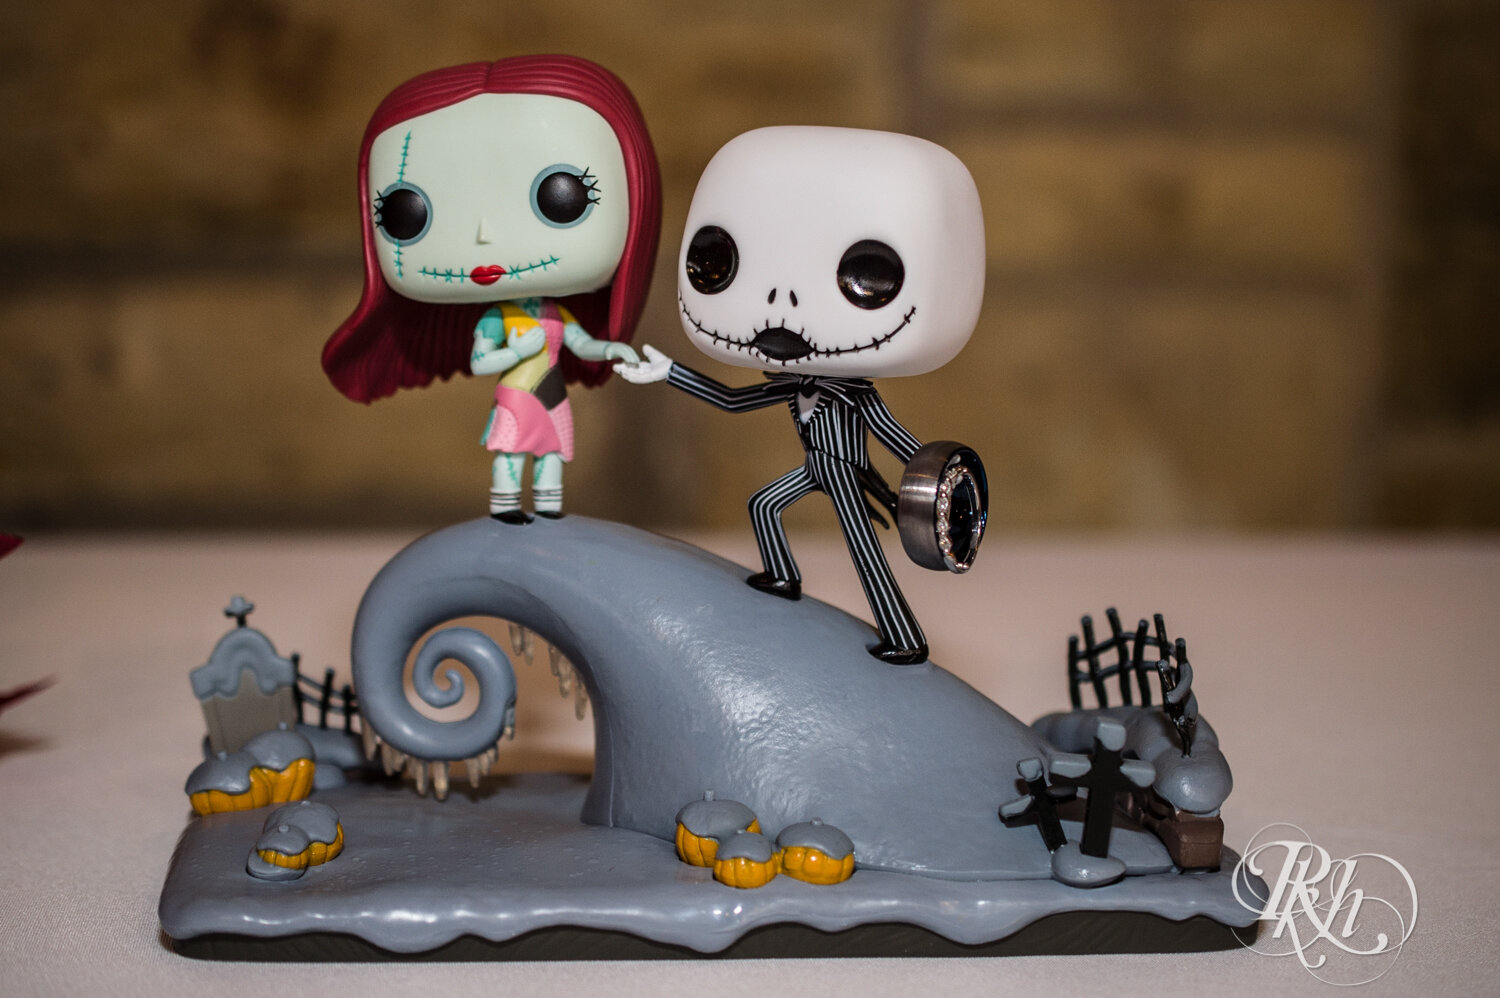 Wedding desert table with Nightmare Before Christmas topper at Olmsted County Fairgrounds in Rochester, Minnesota.